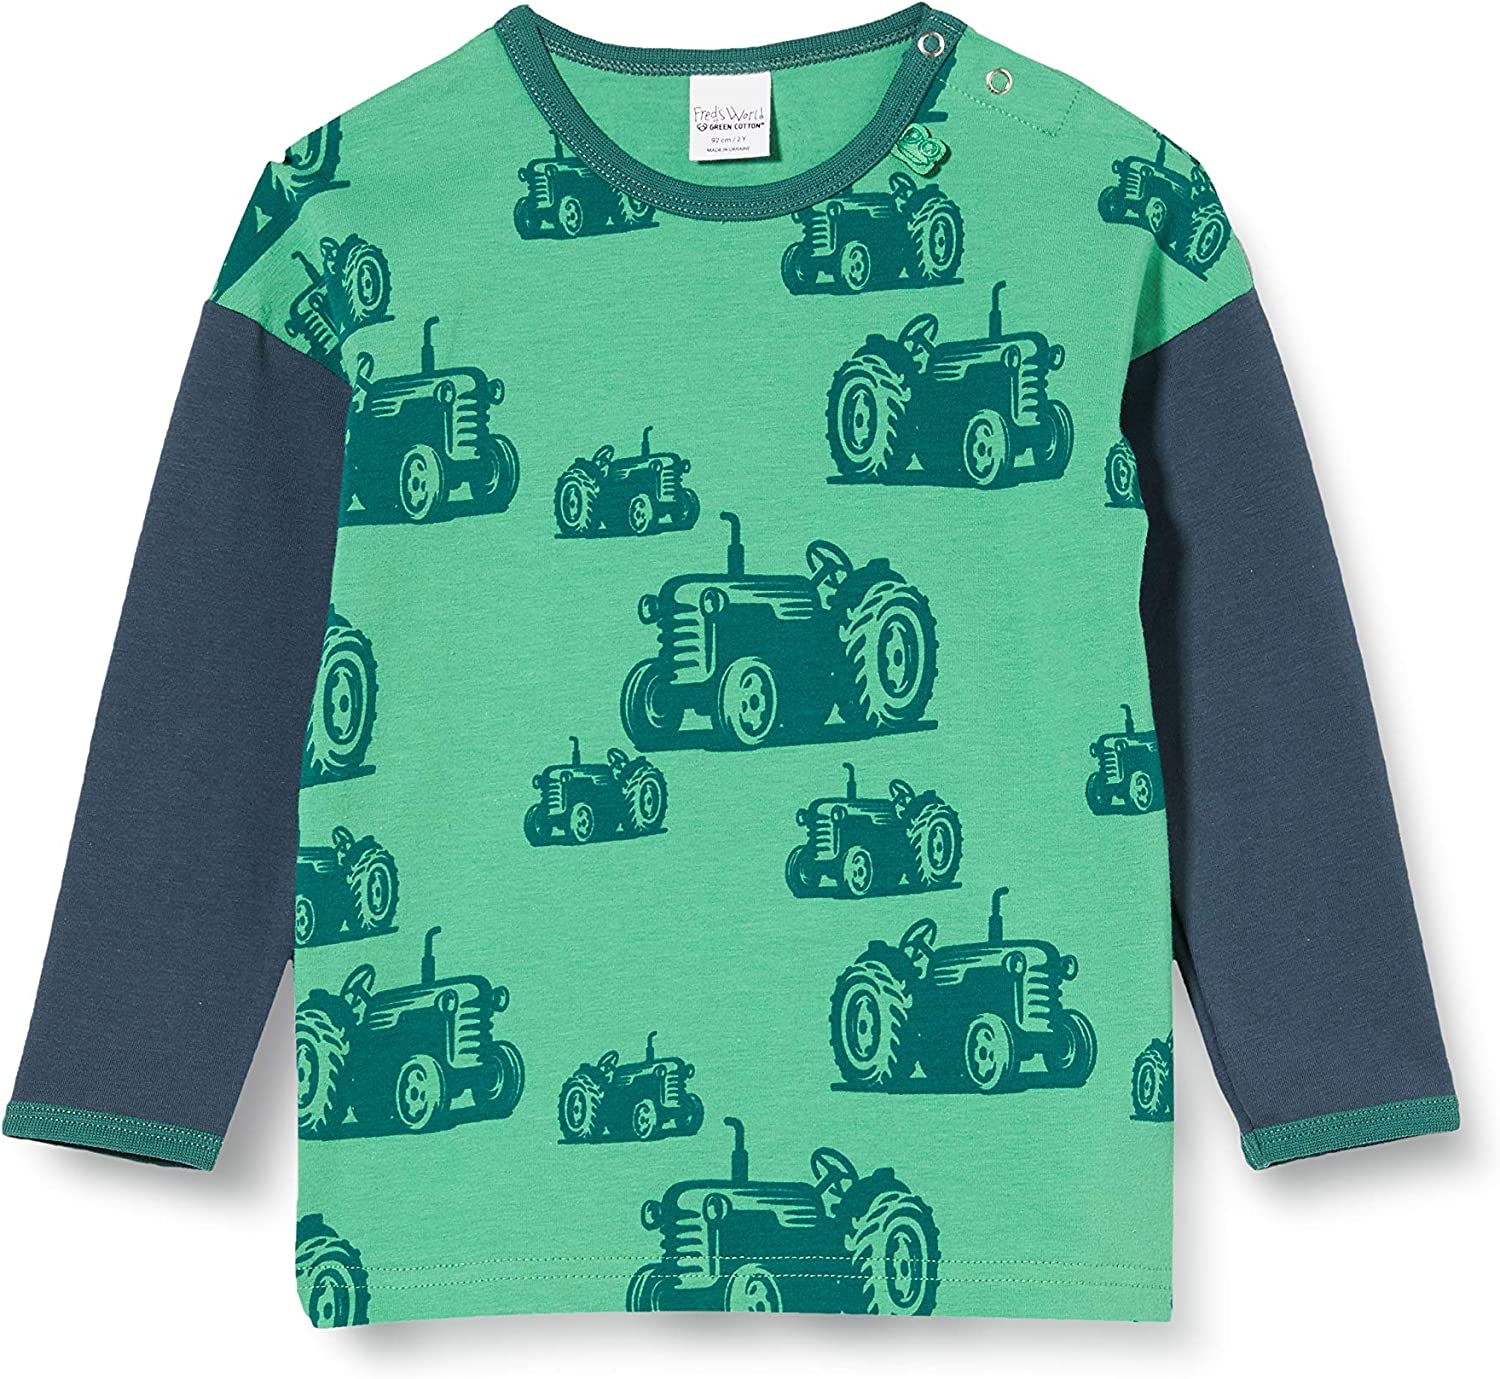 Teenager modstå fusion Farming T Baby - Outlet Fashion